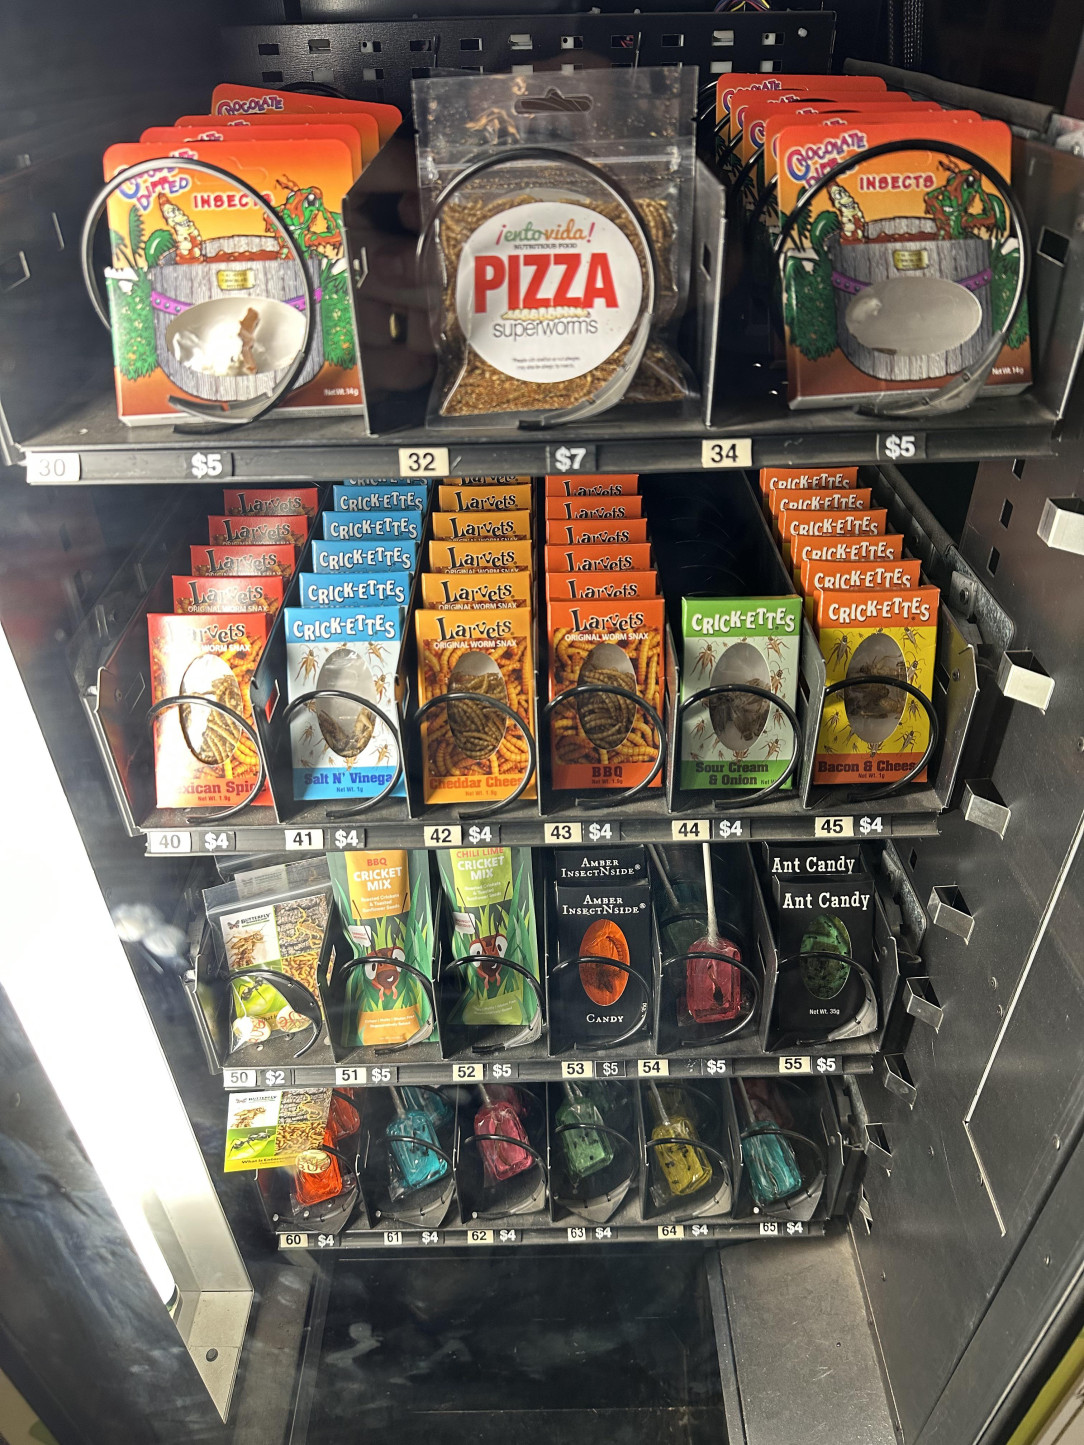 Vending machine spotted today in Arizona l, where all the products include insects (for human consumption)